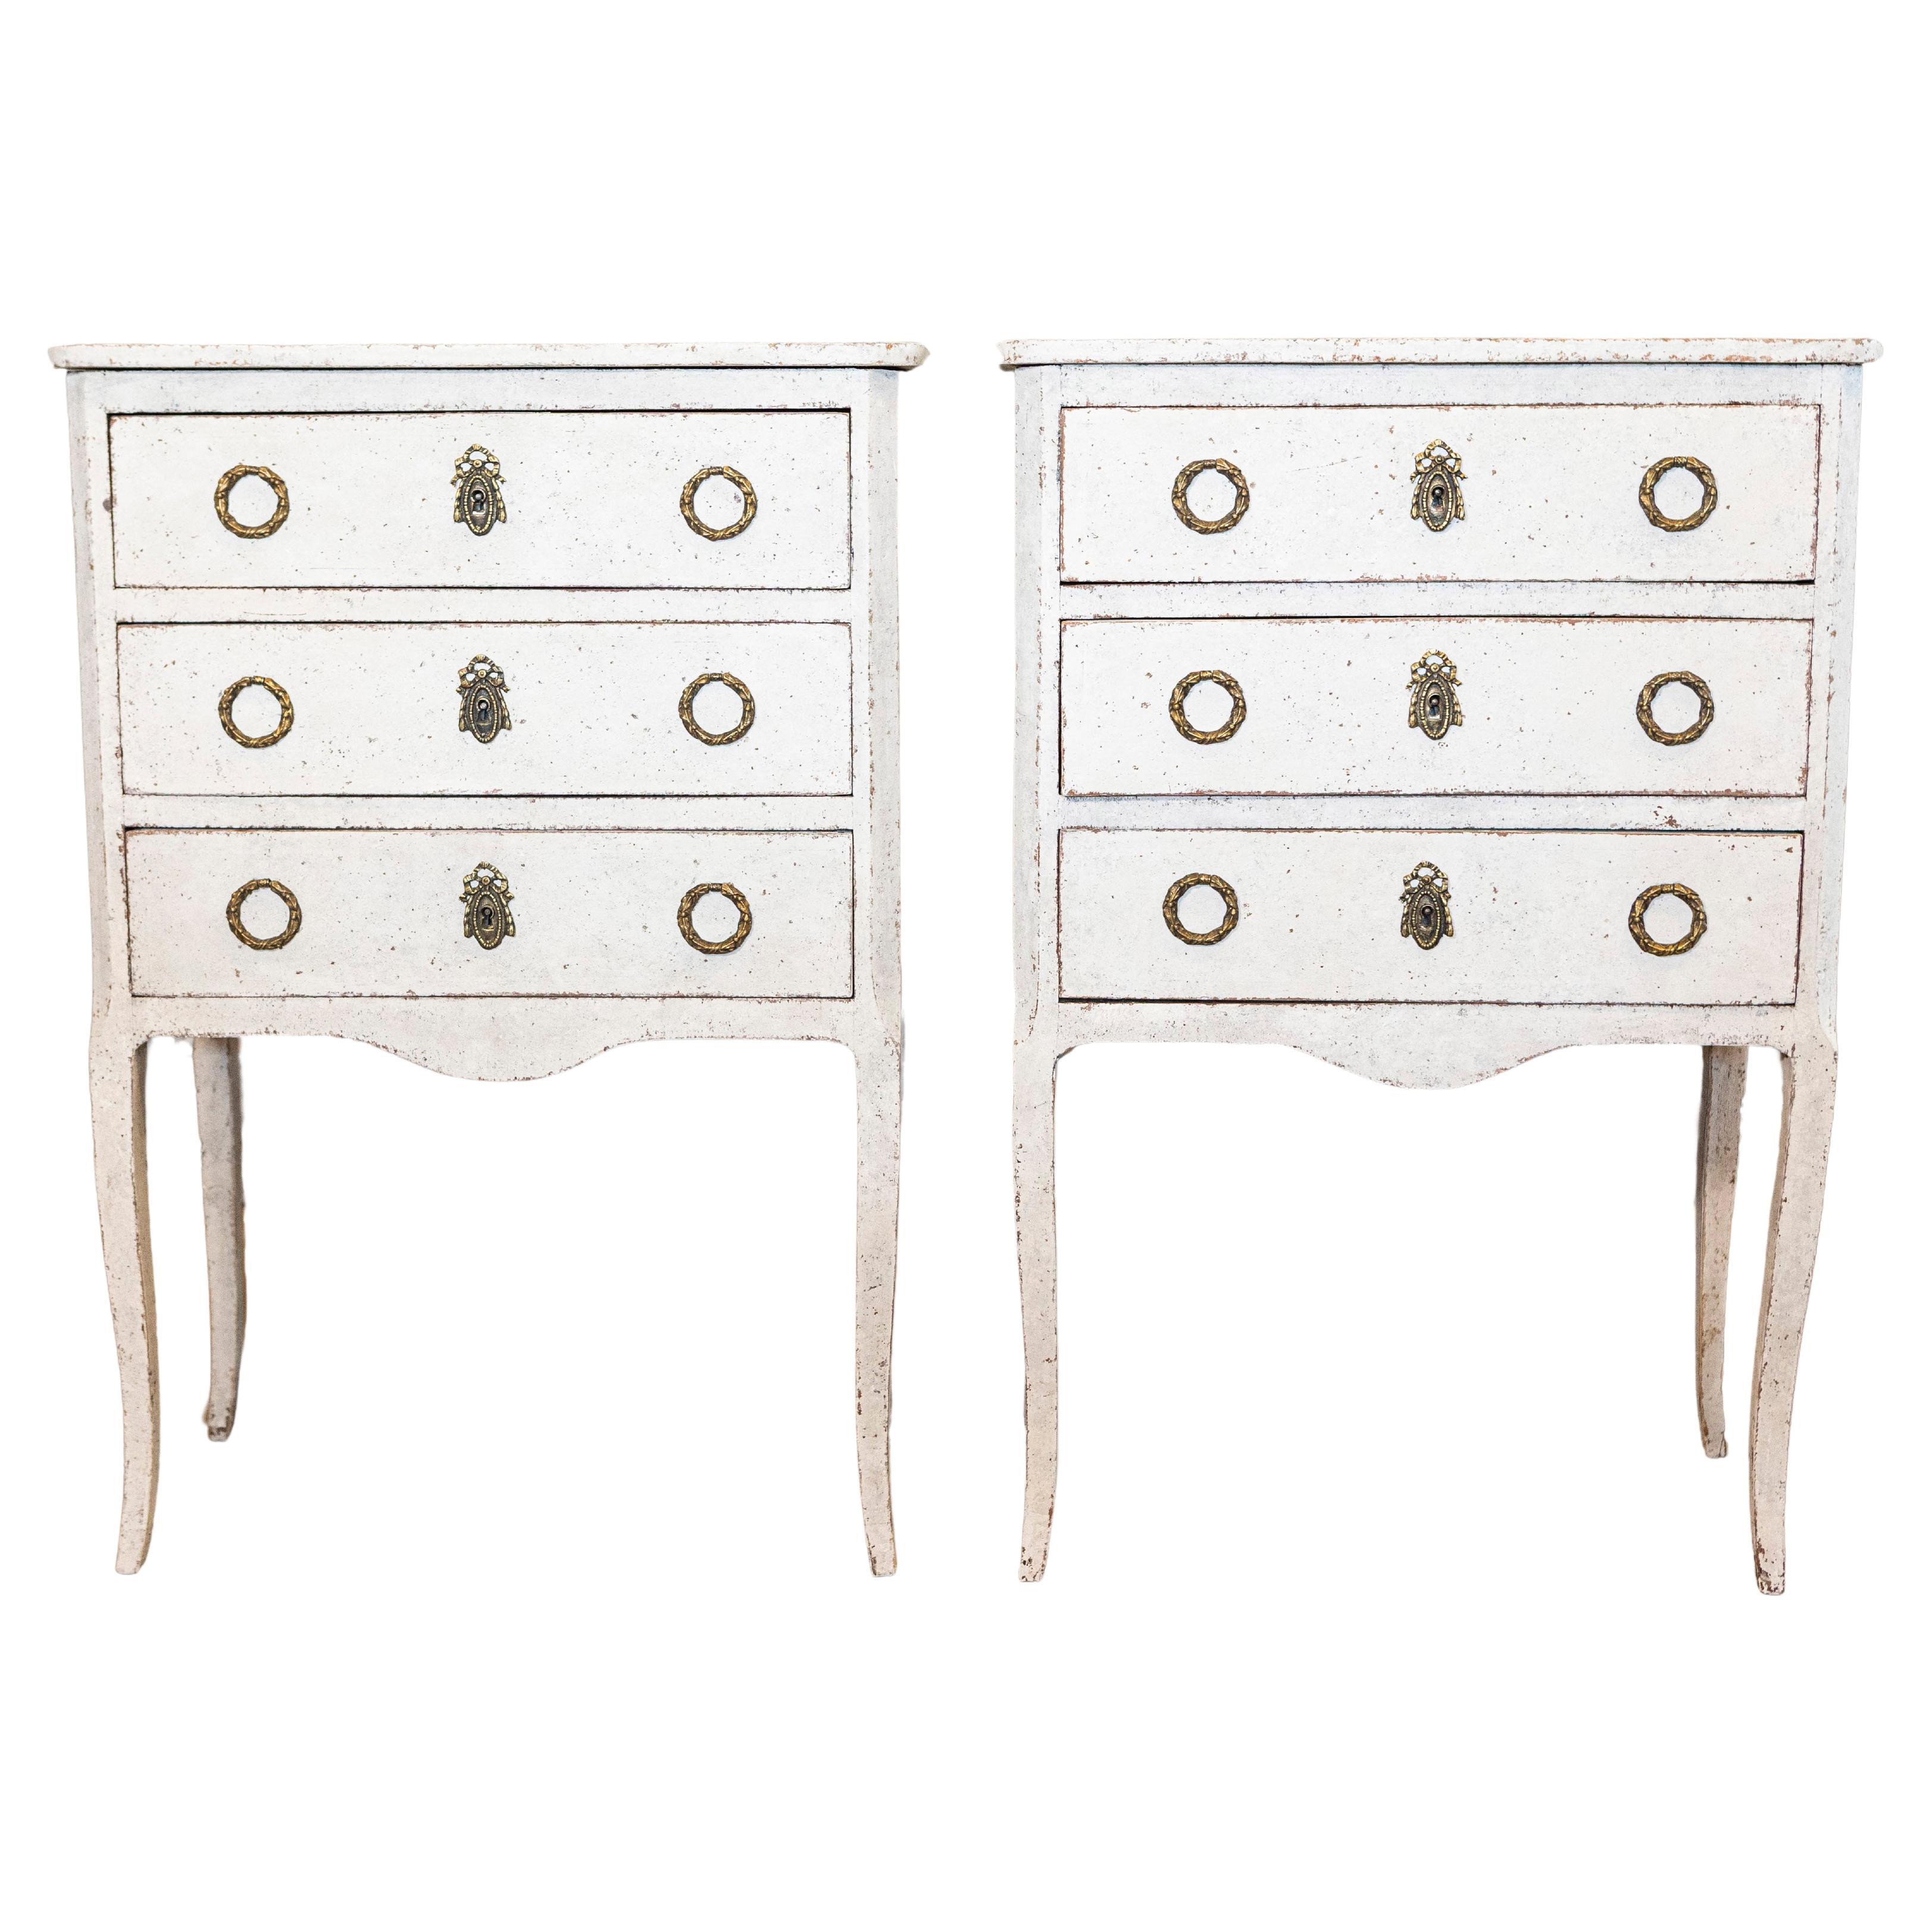 Swedish Gray Painted Bedside Tables with Three Drawers and Cabriole Legs, a Pair For Sale